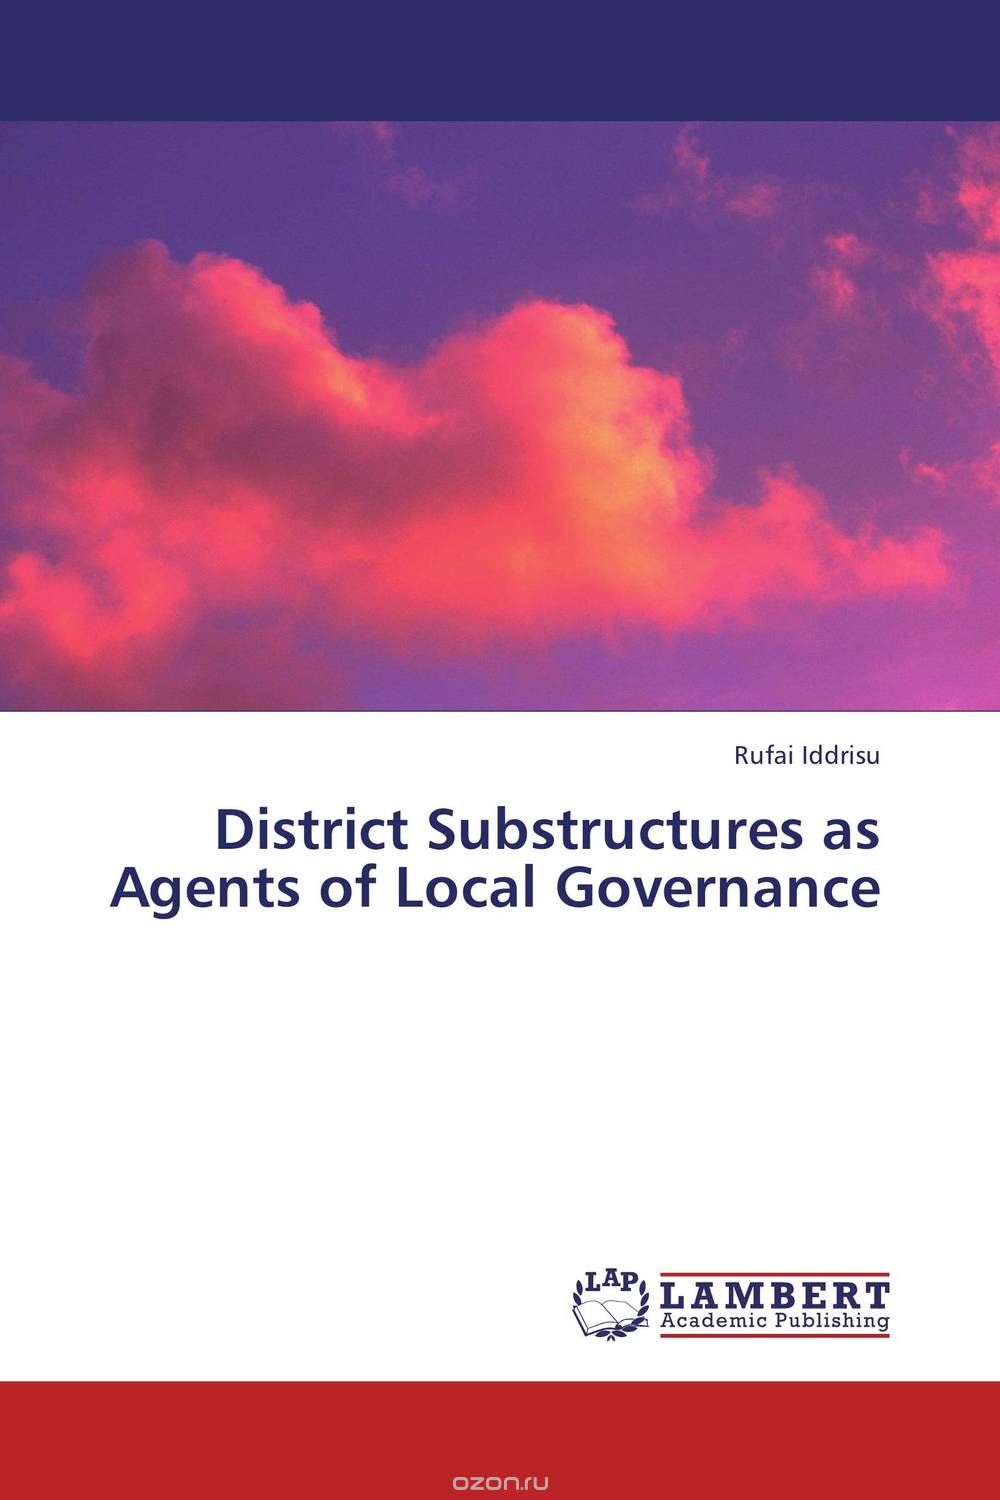 Скачать книгу "District Substructures as Agents of Local Governance"